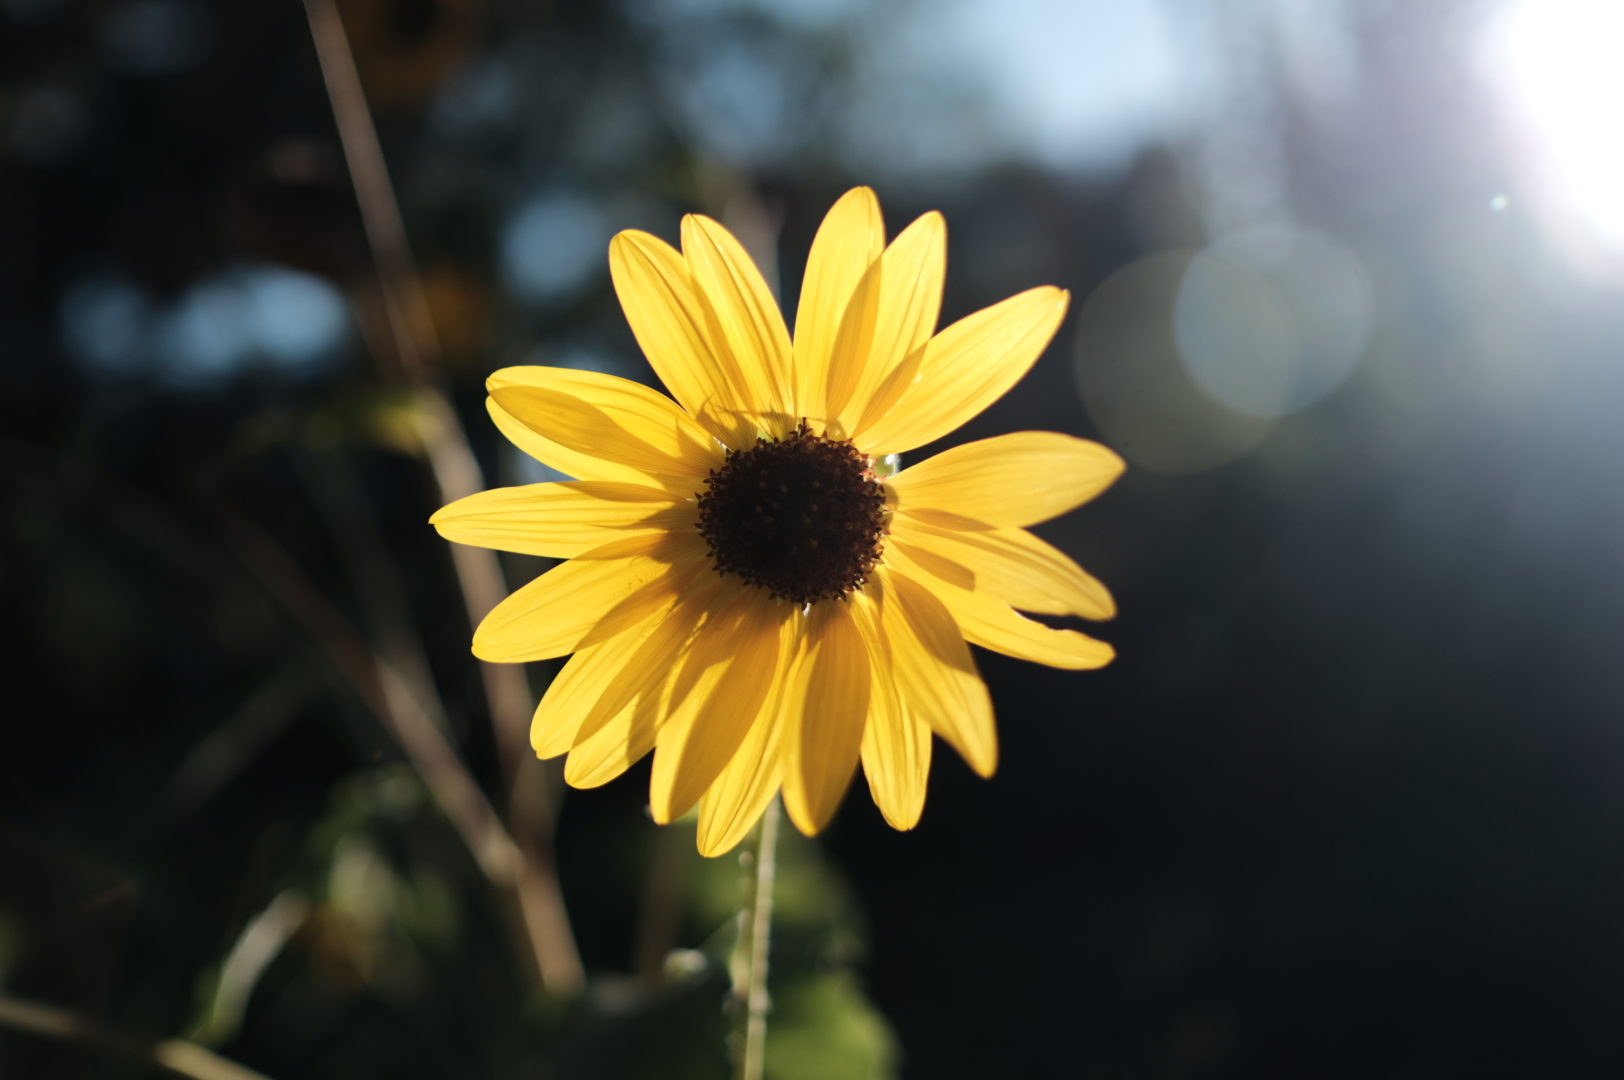 A sunflower is illuminated by the sun shining bright behind it.